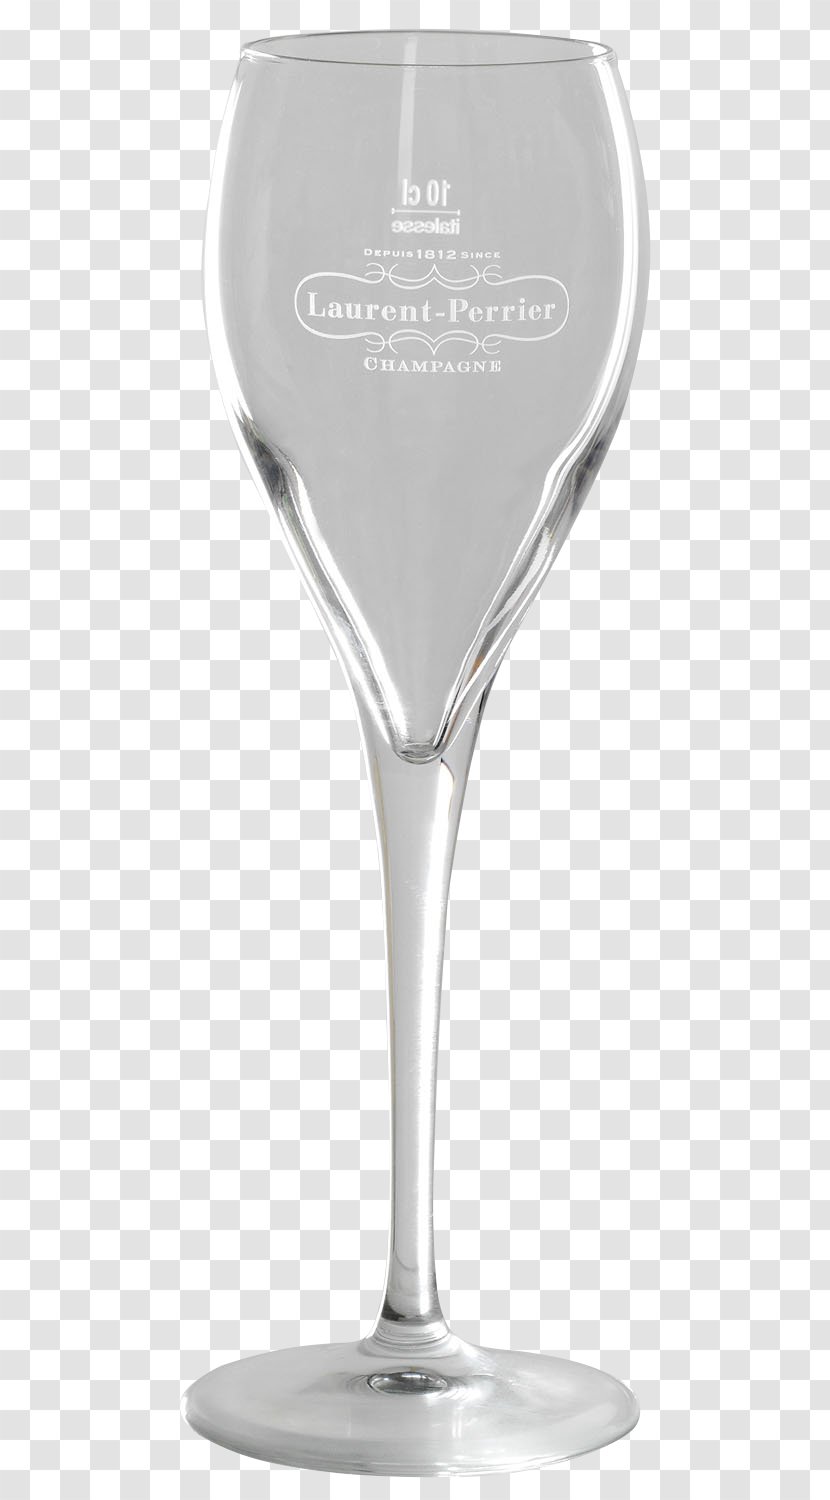 Wine Glass Champagne Cocktail Martini Transparent PNG